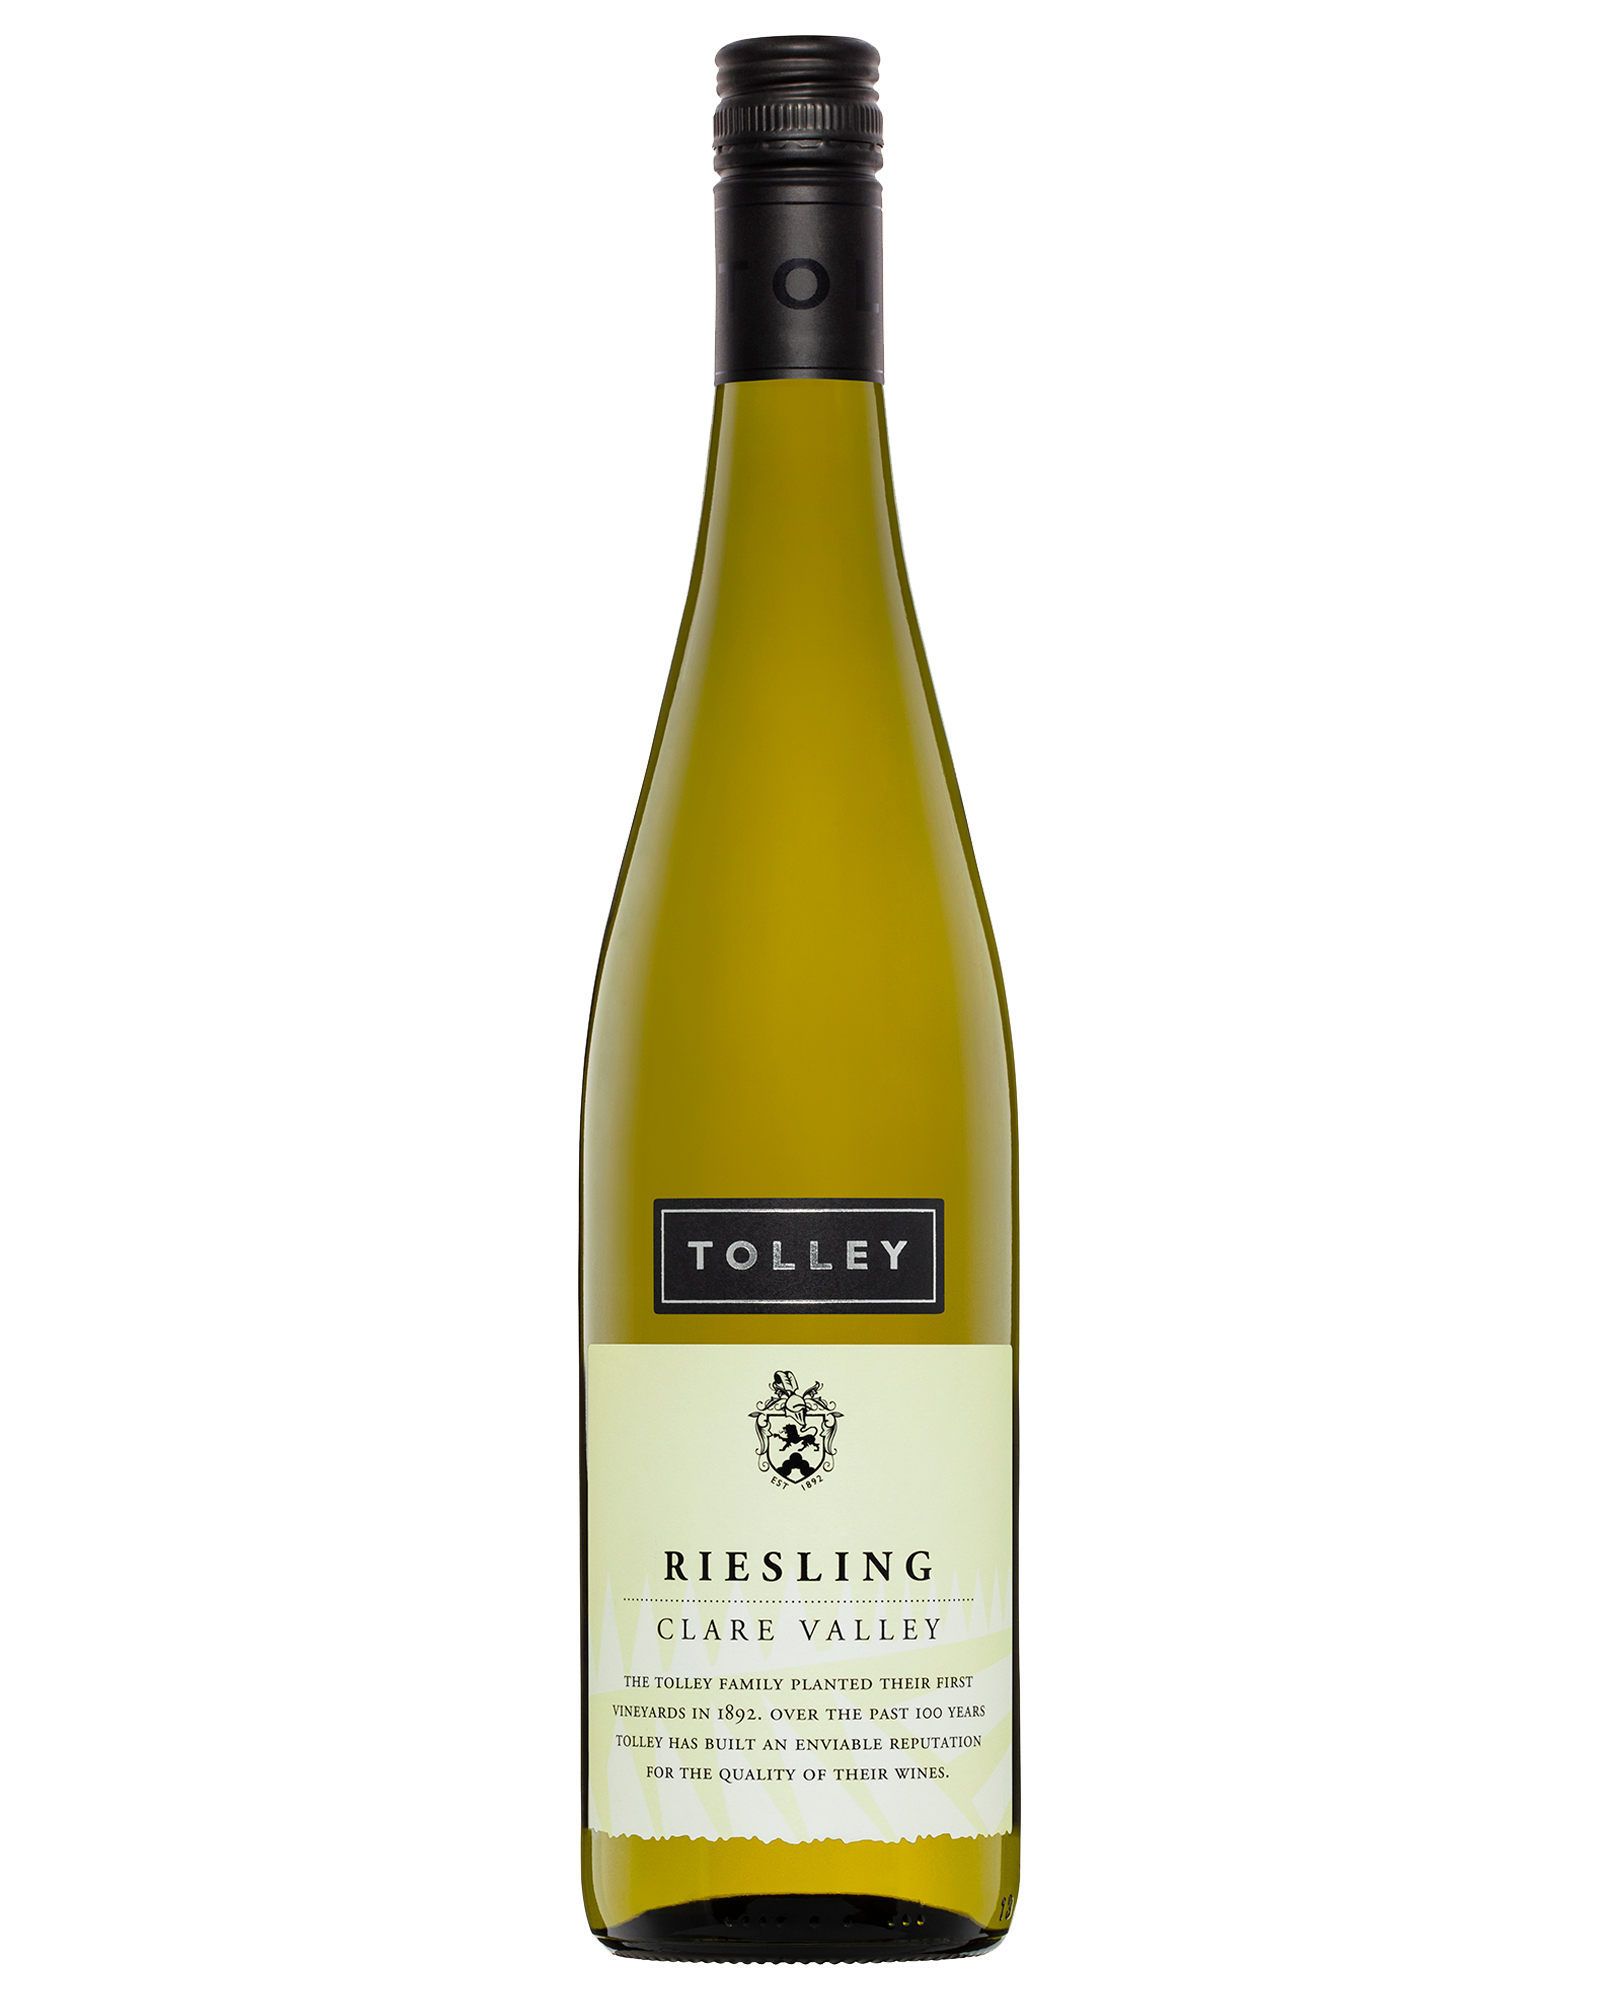 Tolley Clare Valley Riesling